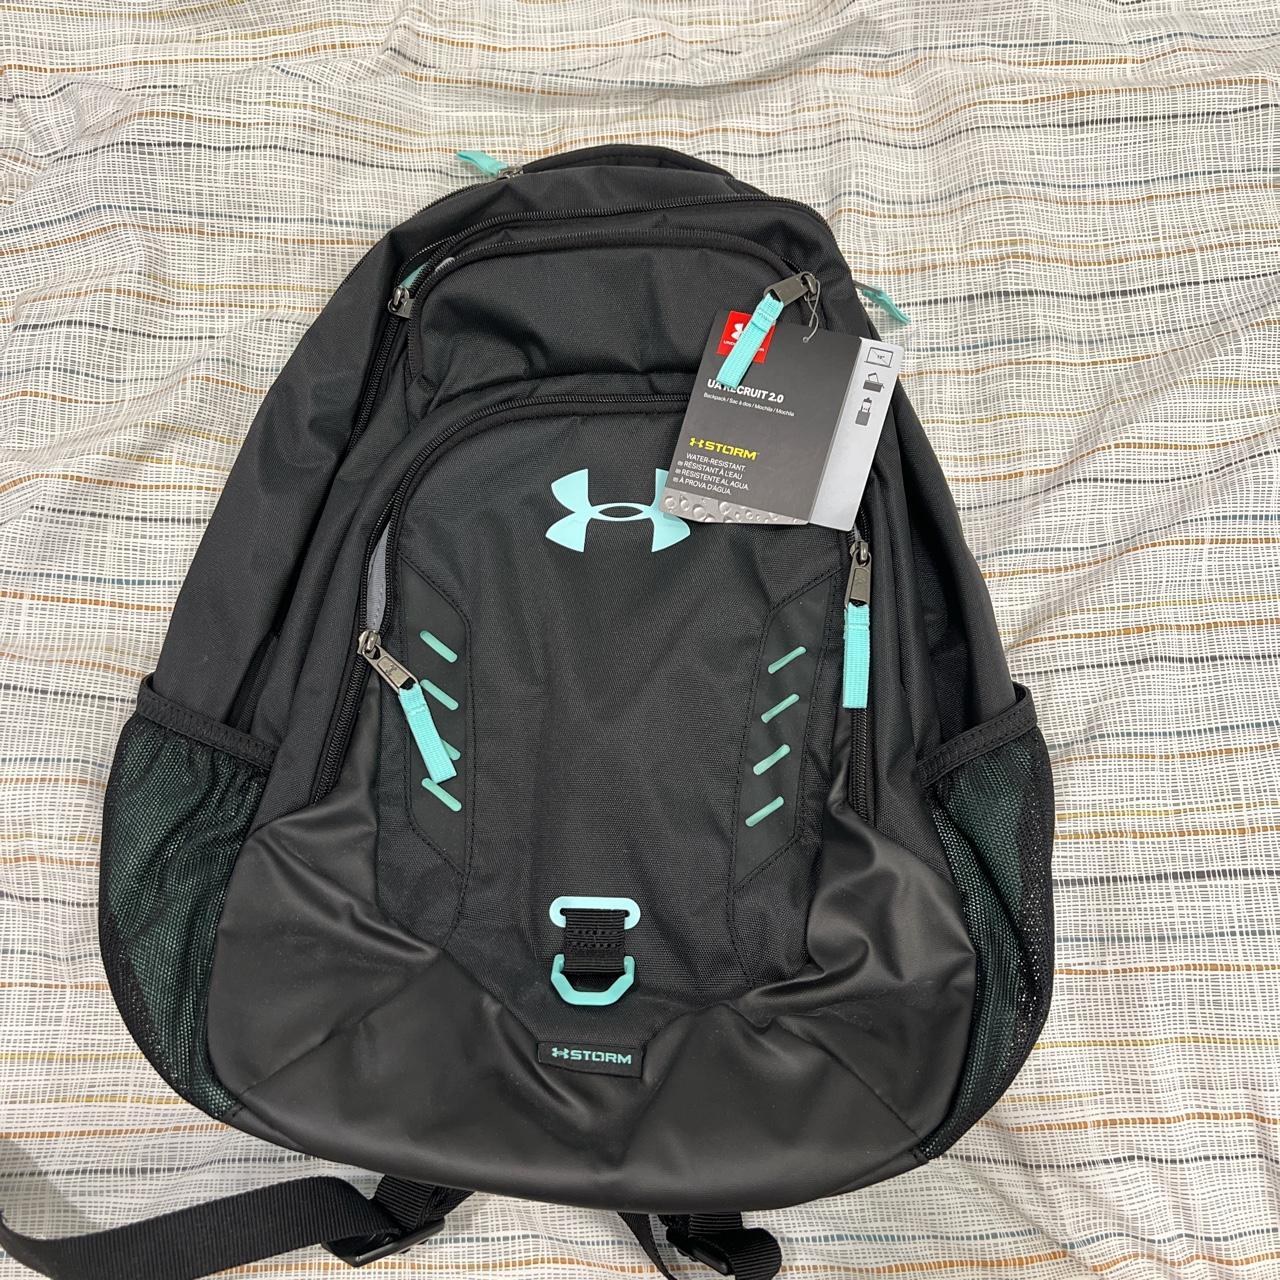 New Under Armour Storm Recruit Backpack Teal/Black/White